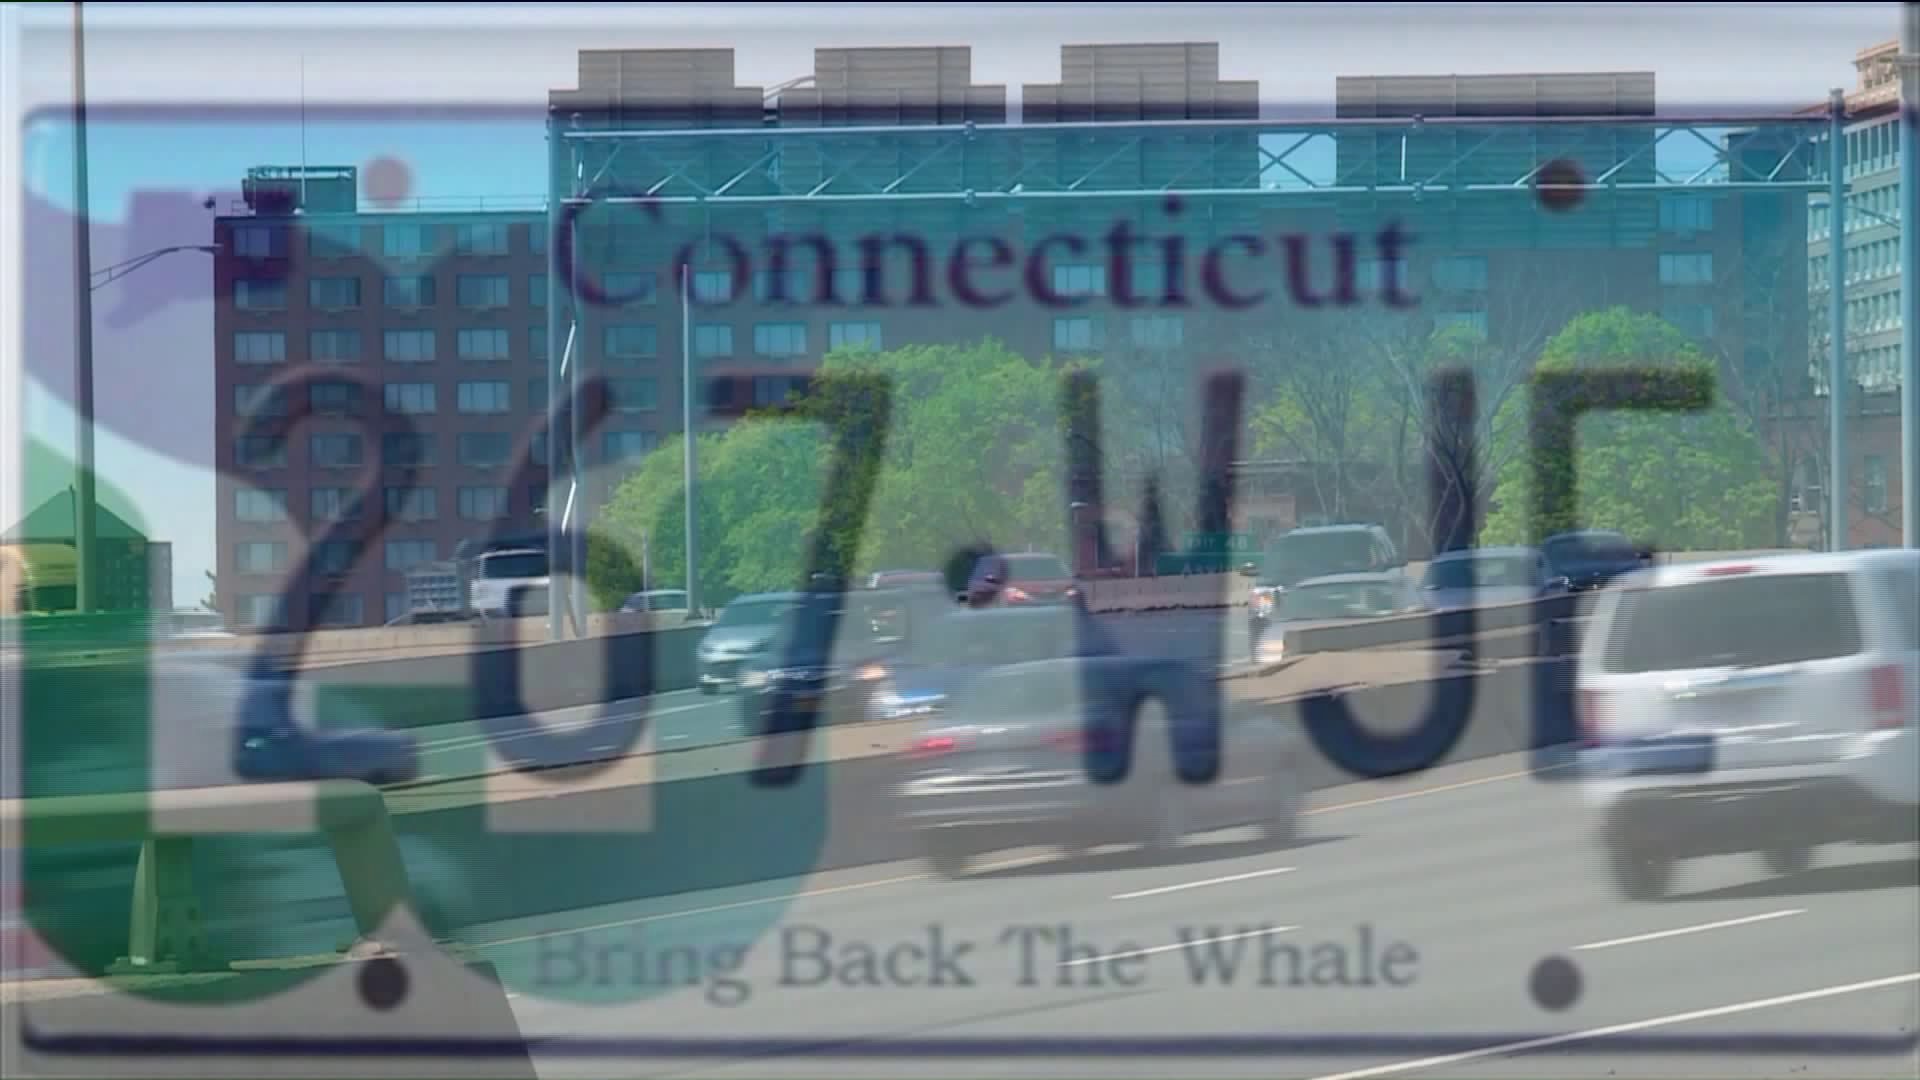 Bringing back the Whalers on a license plate